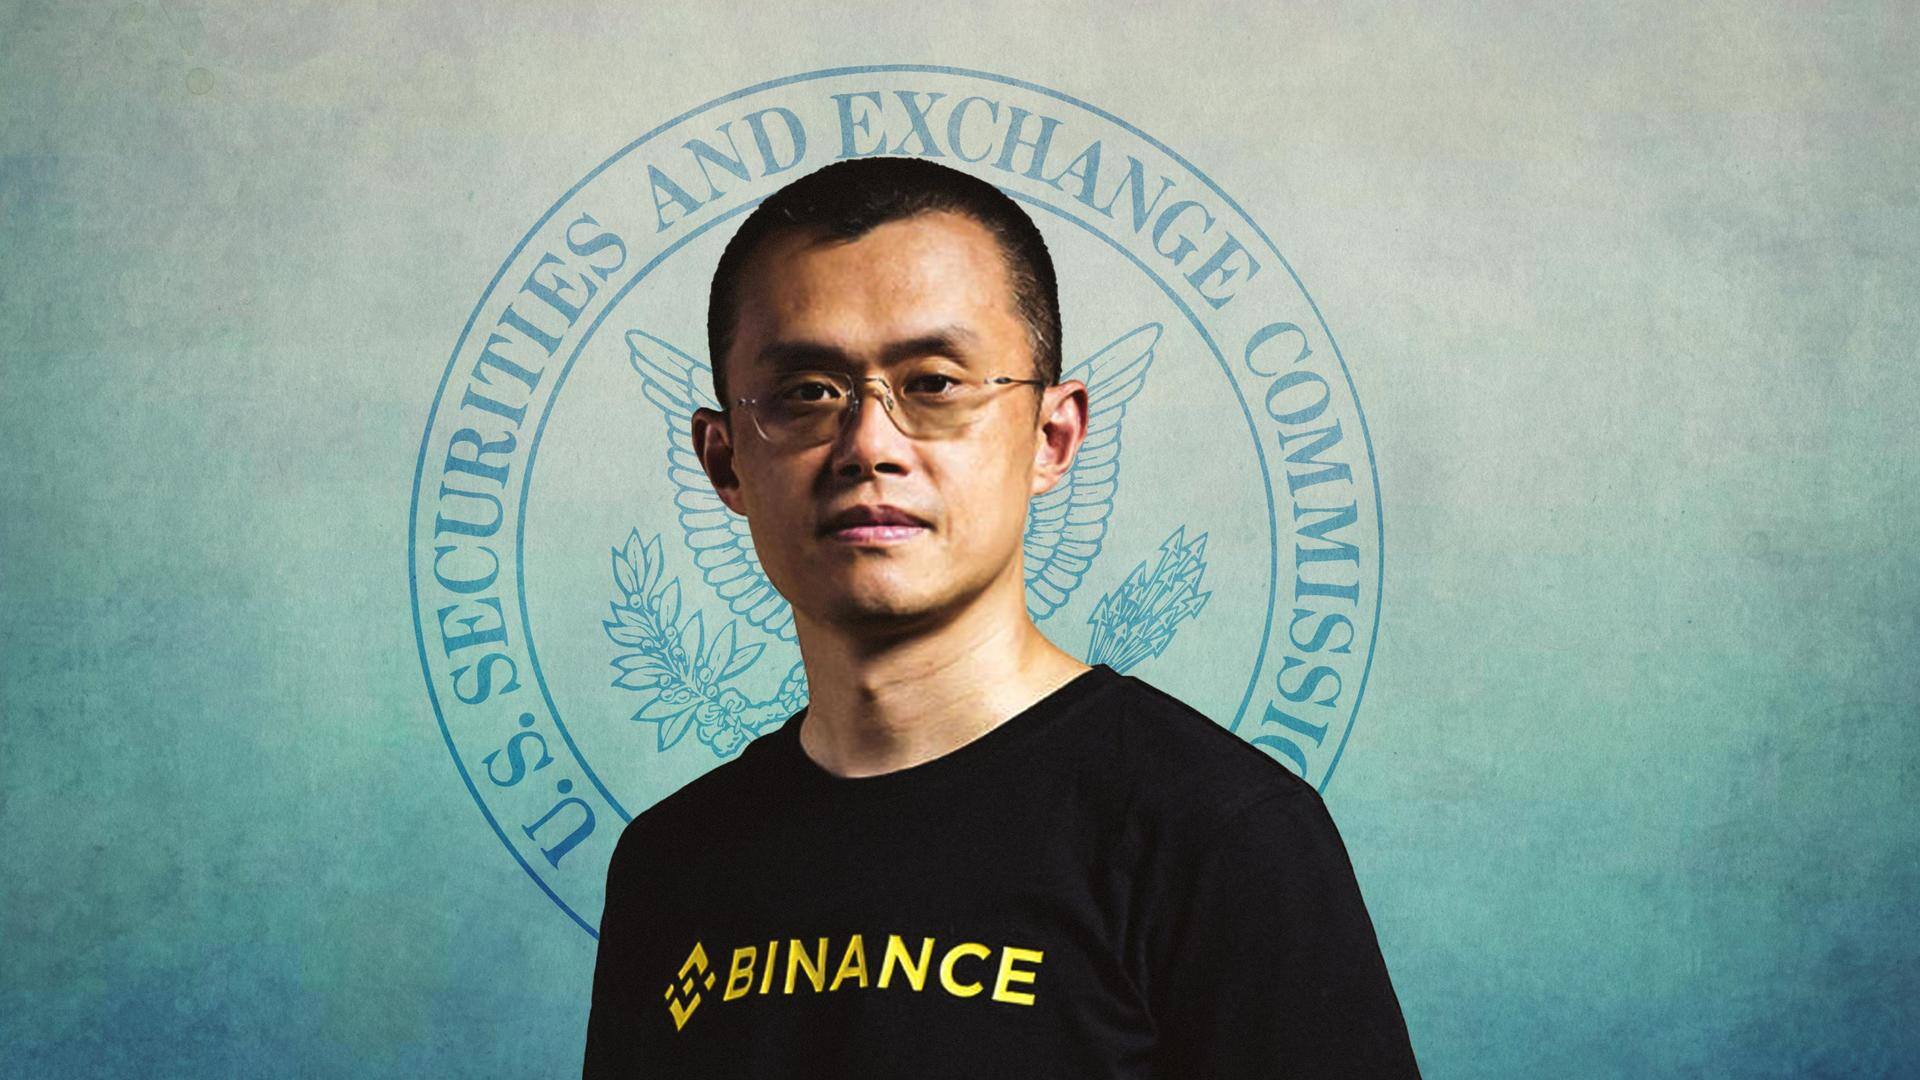 Binance and founder Changpeng Zhao sued by SEC: Here's why